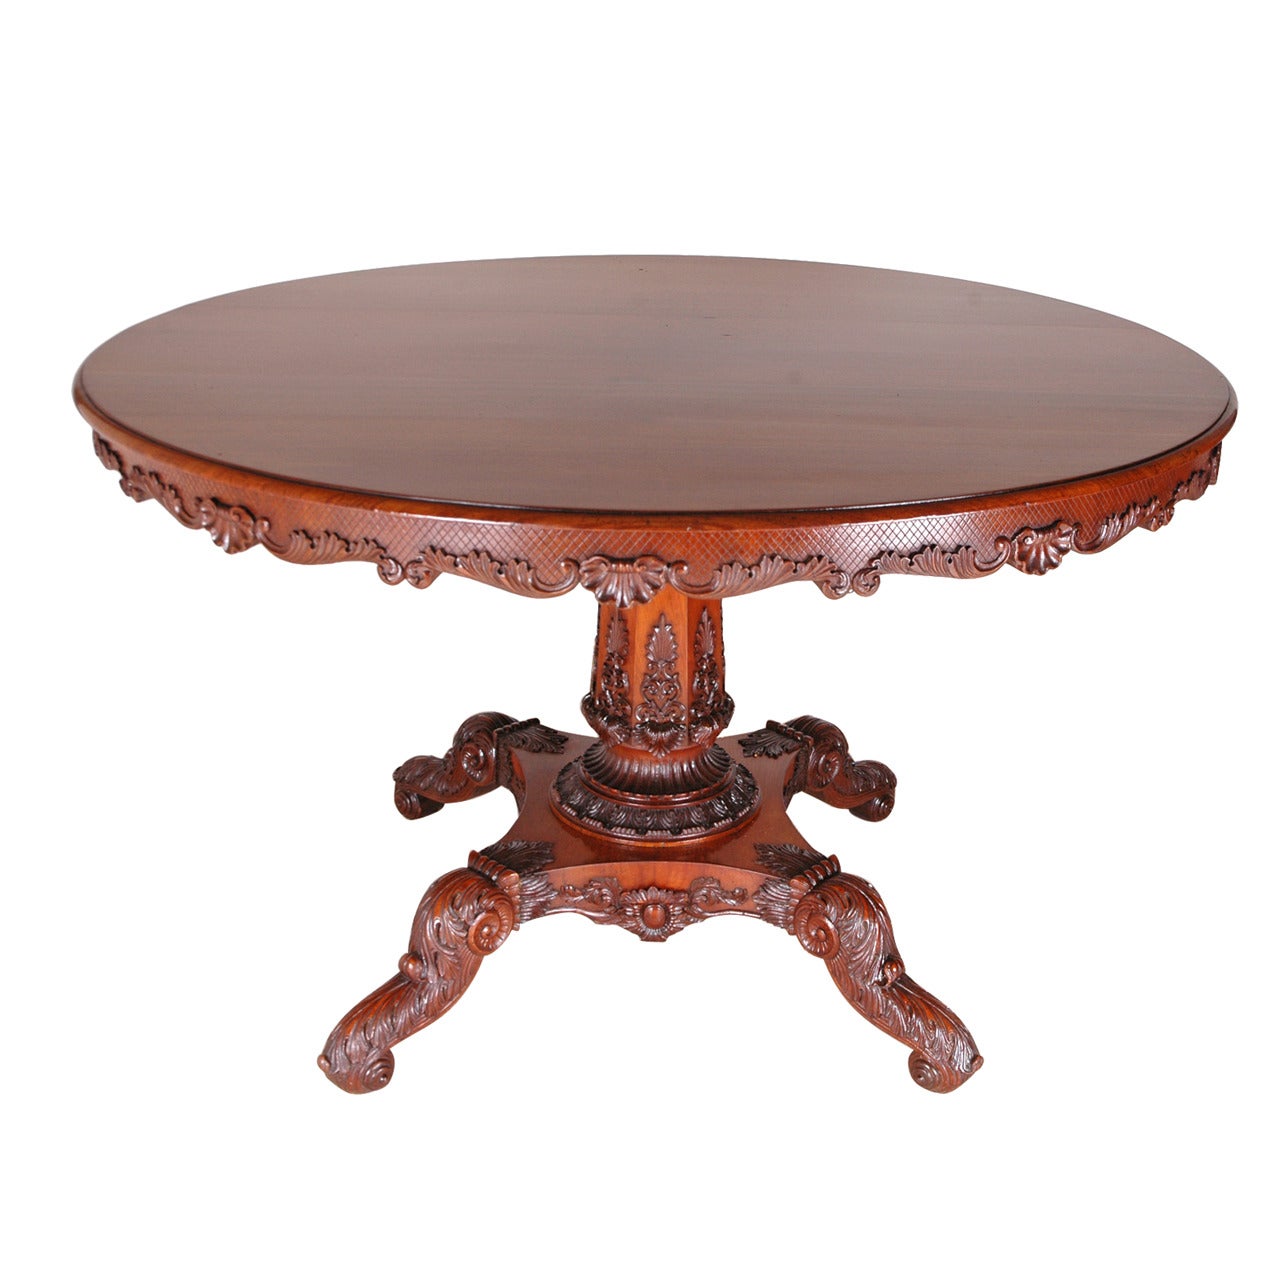  48" Round English Regency Dining Table in Mahogany with Carved Center Pedestal For Sale